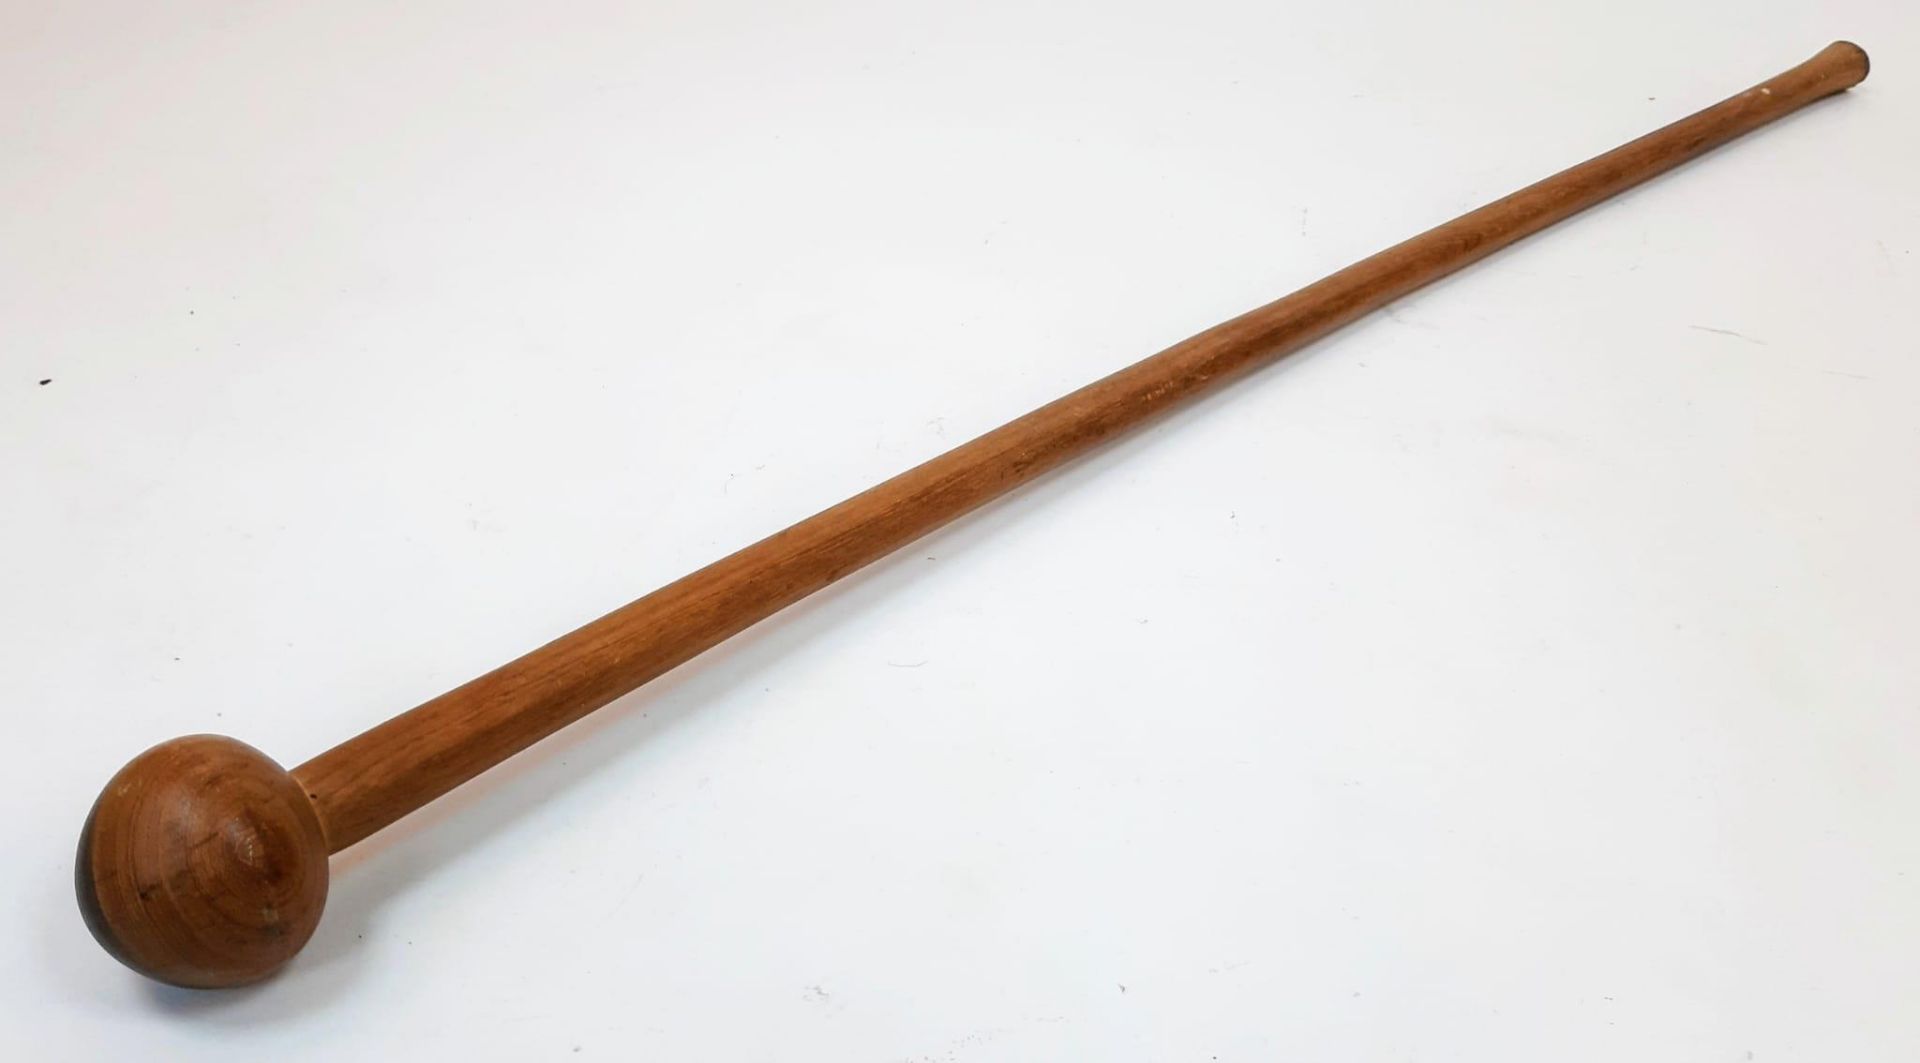 A 19th/early 20th Century African Knobkerrie (South African Tribal Weapon). Excellent Condition